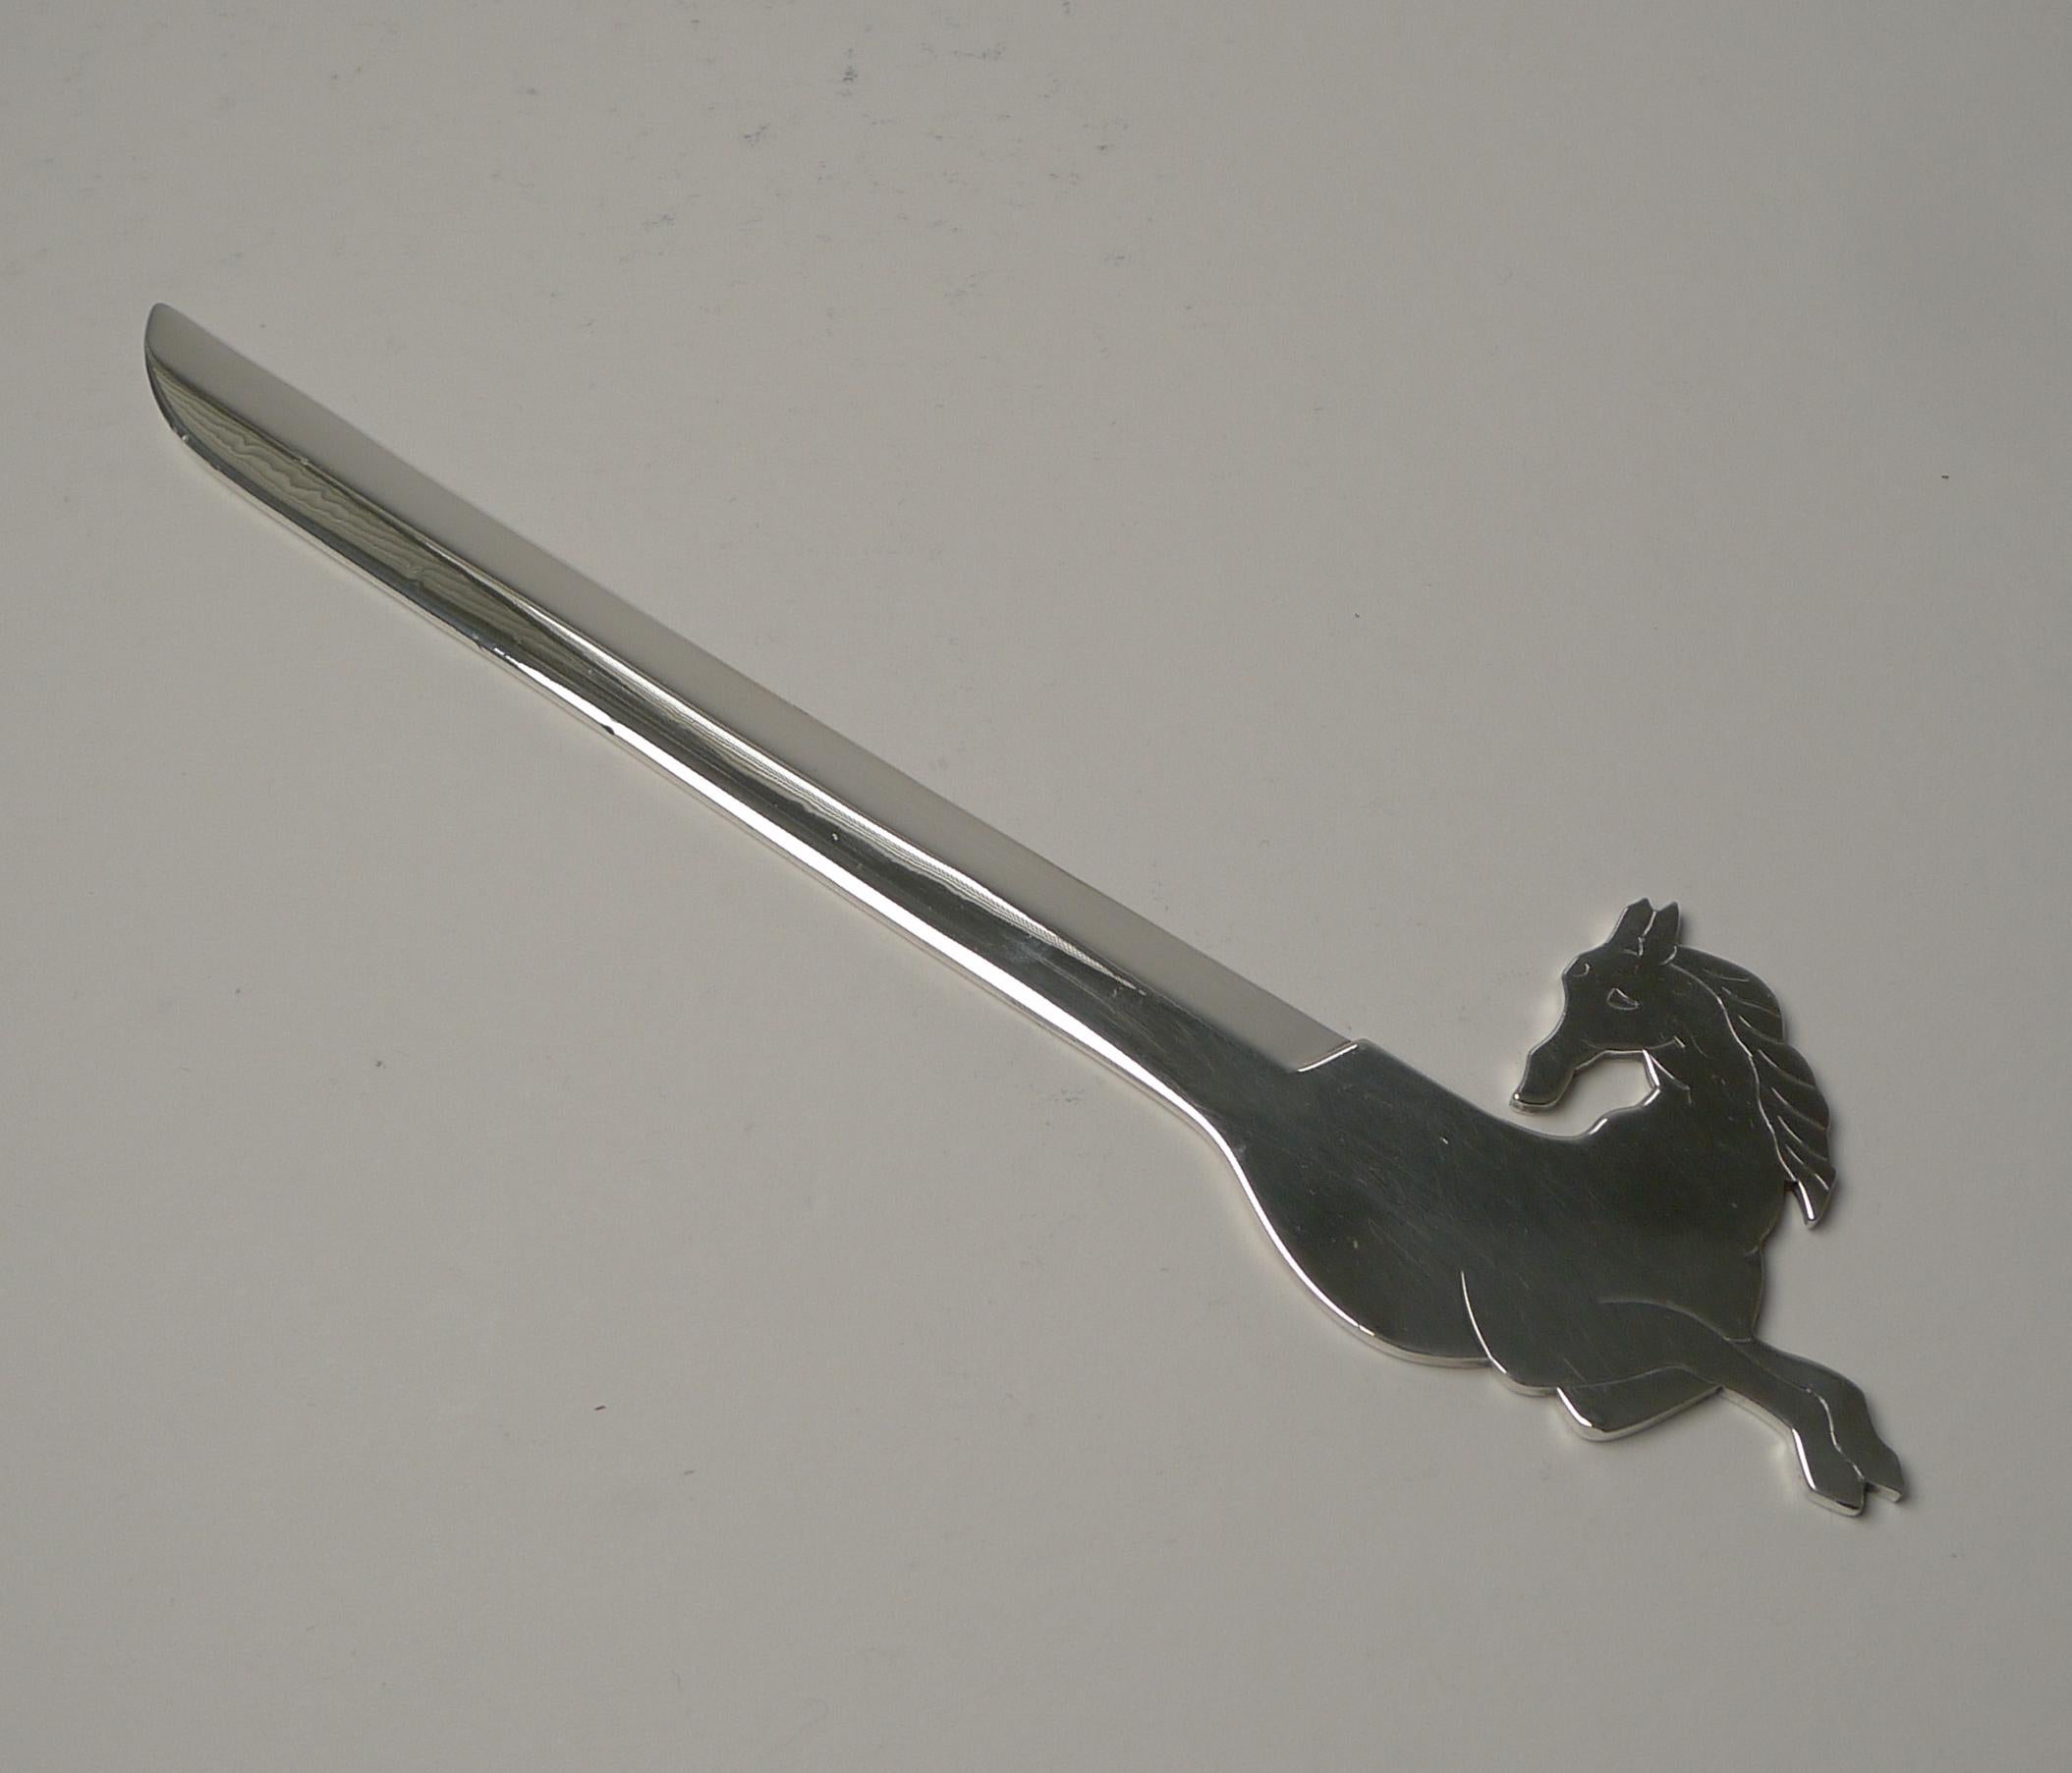 A superb and scarcely found letter opener made in silvered bronze, the handle in the form of a horse.

Dating to c.1960, the underside is fully marked 